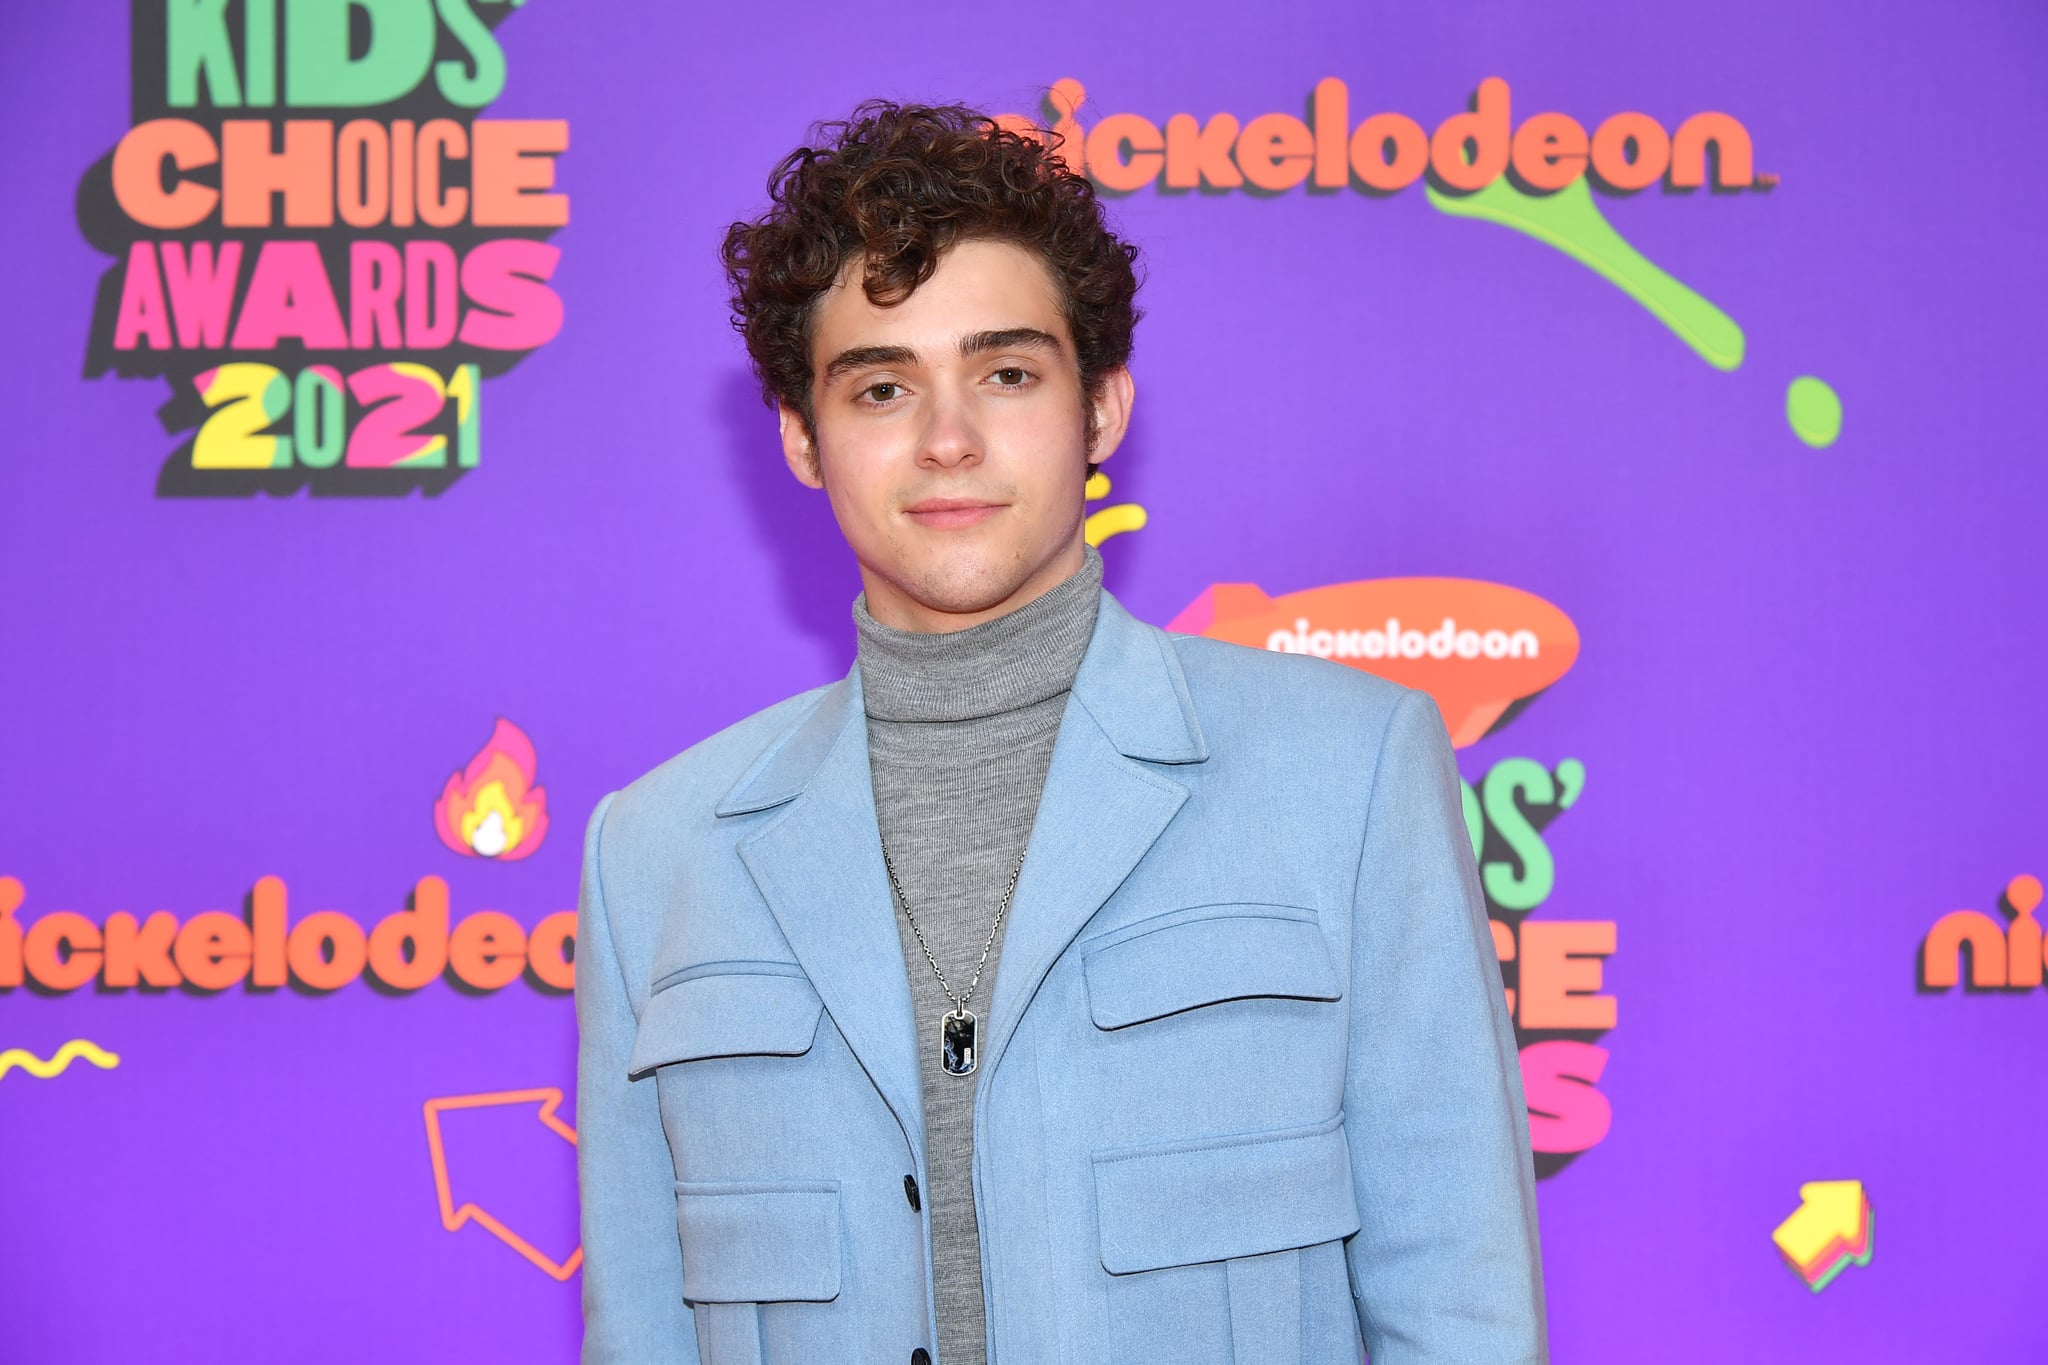 SANTA MONICA, CALIFORNIA - MARCH 13: In this image released on March 13, Joshua Bassett attends Nickelodeon's Kids' Choice Awards at Barker Hangar on March 13, 2021 in Santa Monica, California. (Photo by Amy Sussman/KCA2021/Getty Images for Nickelodeon)